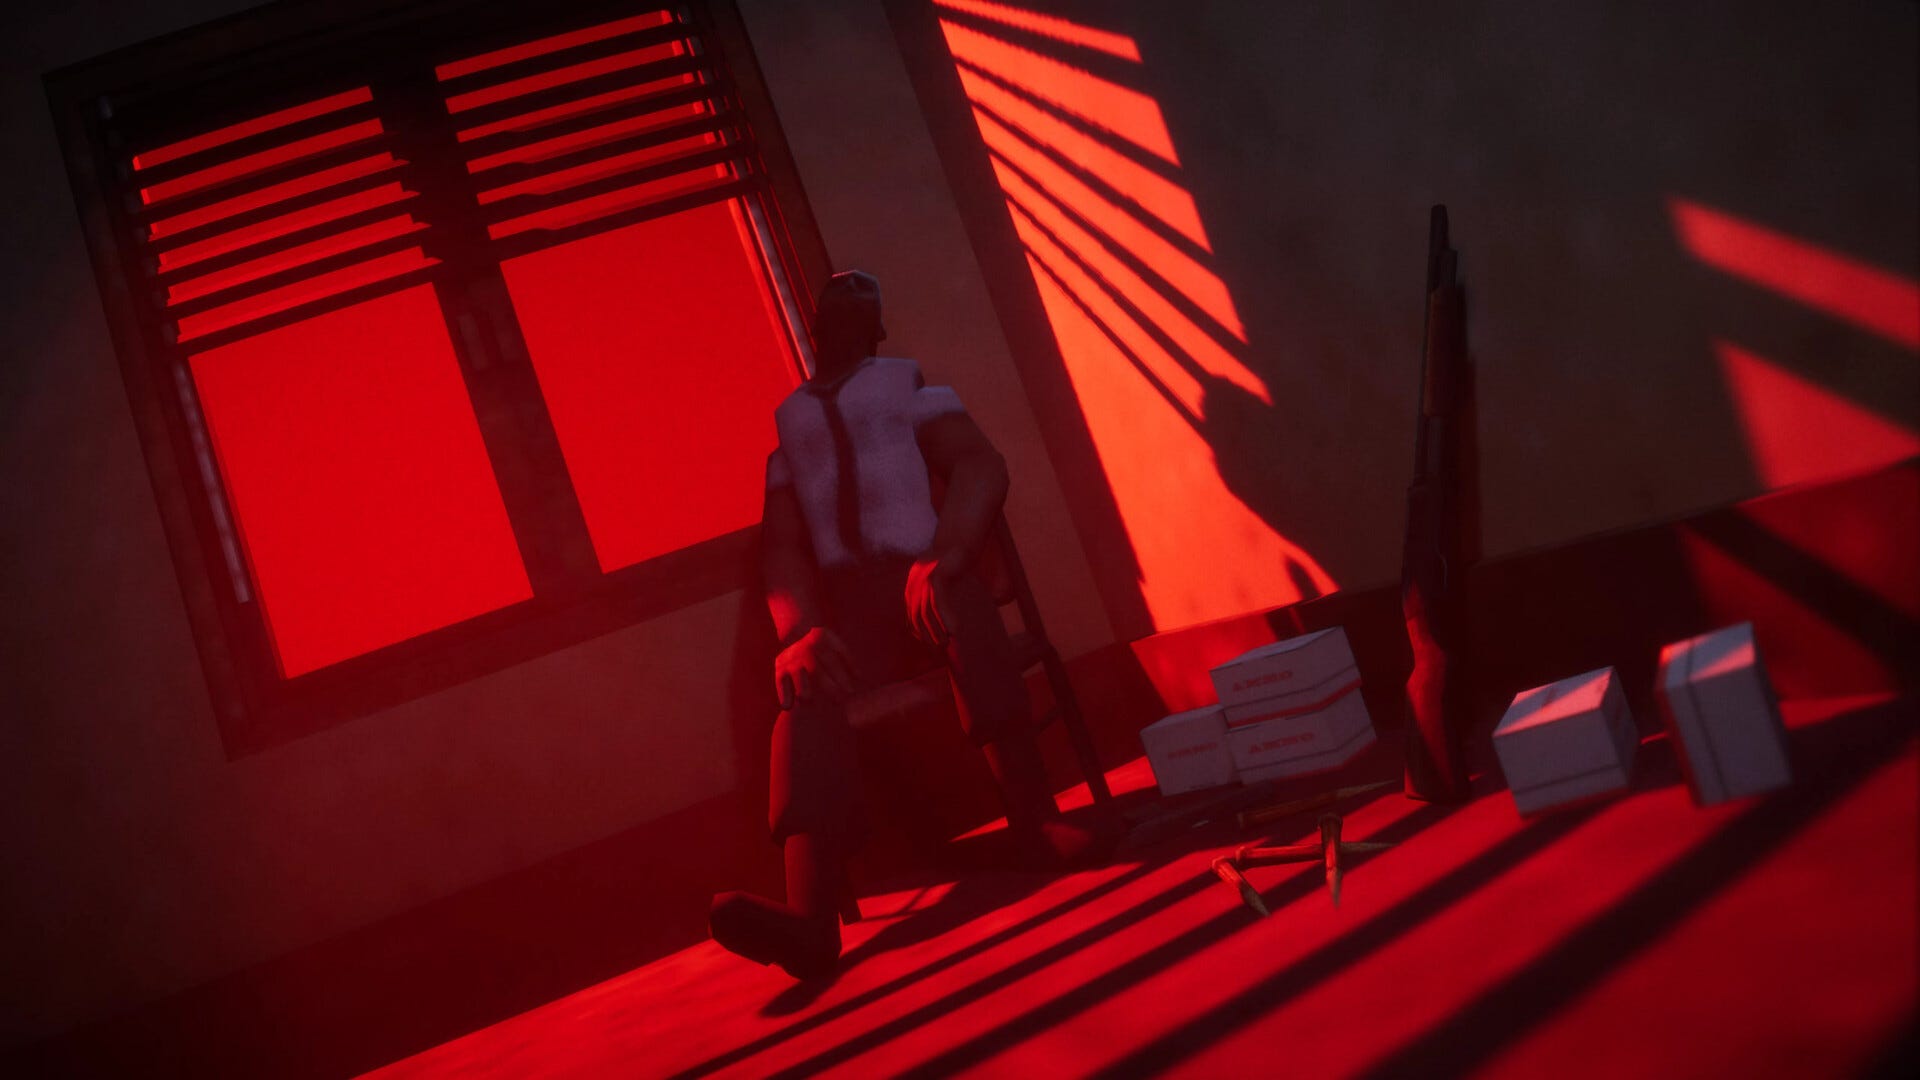 A screenshot from El Paso, Elsewhere. A man reclines on a chair in the shadow of a glowing red room. A shotgun leans on the wall.